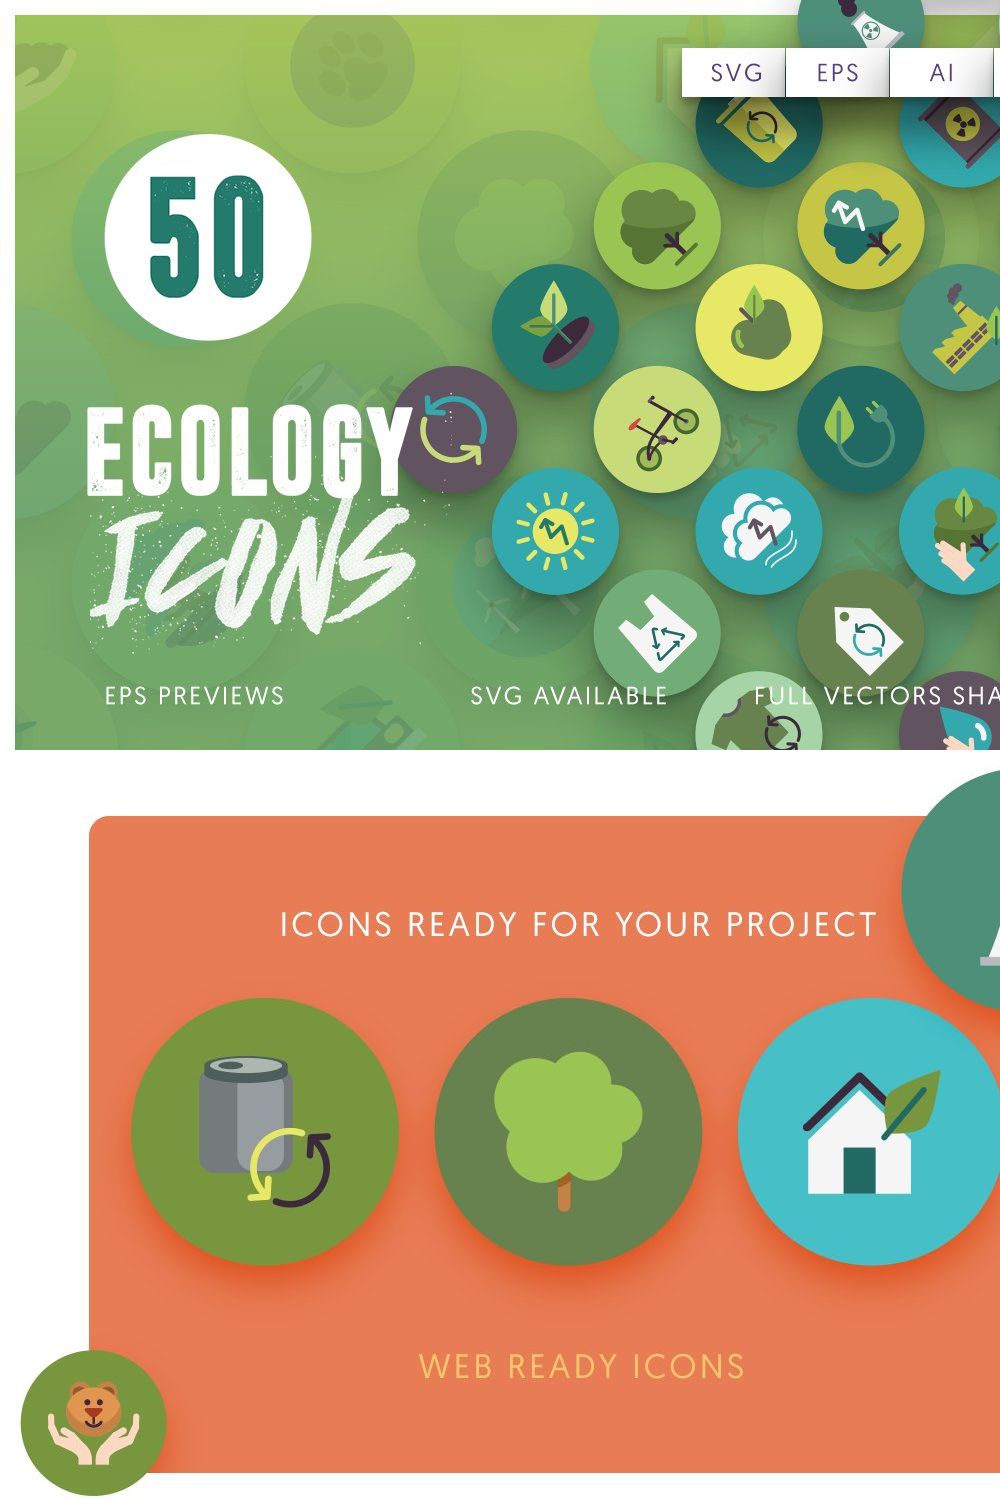 50 Ecology Icons pinterest preview image.